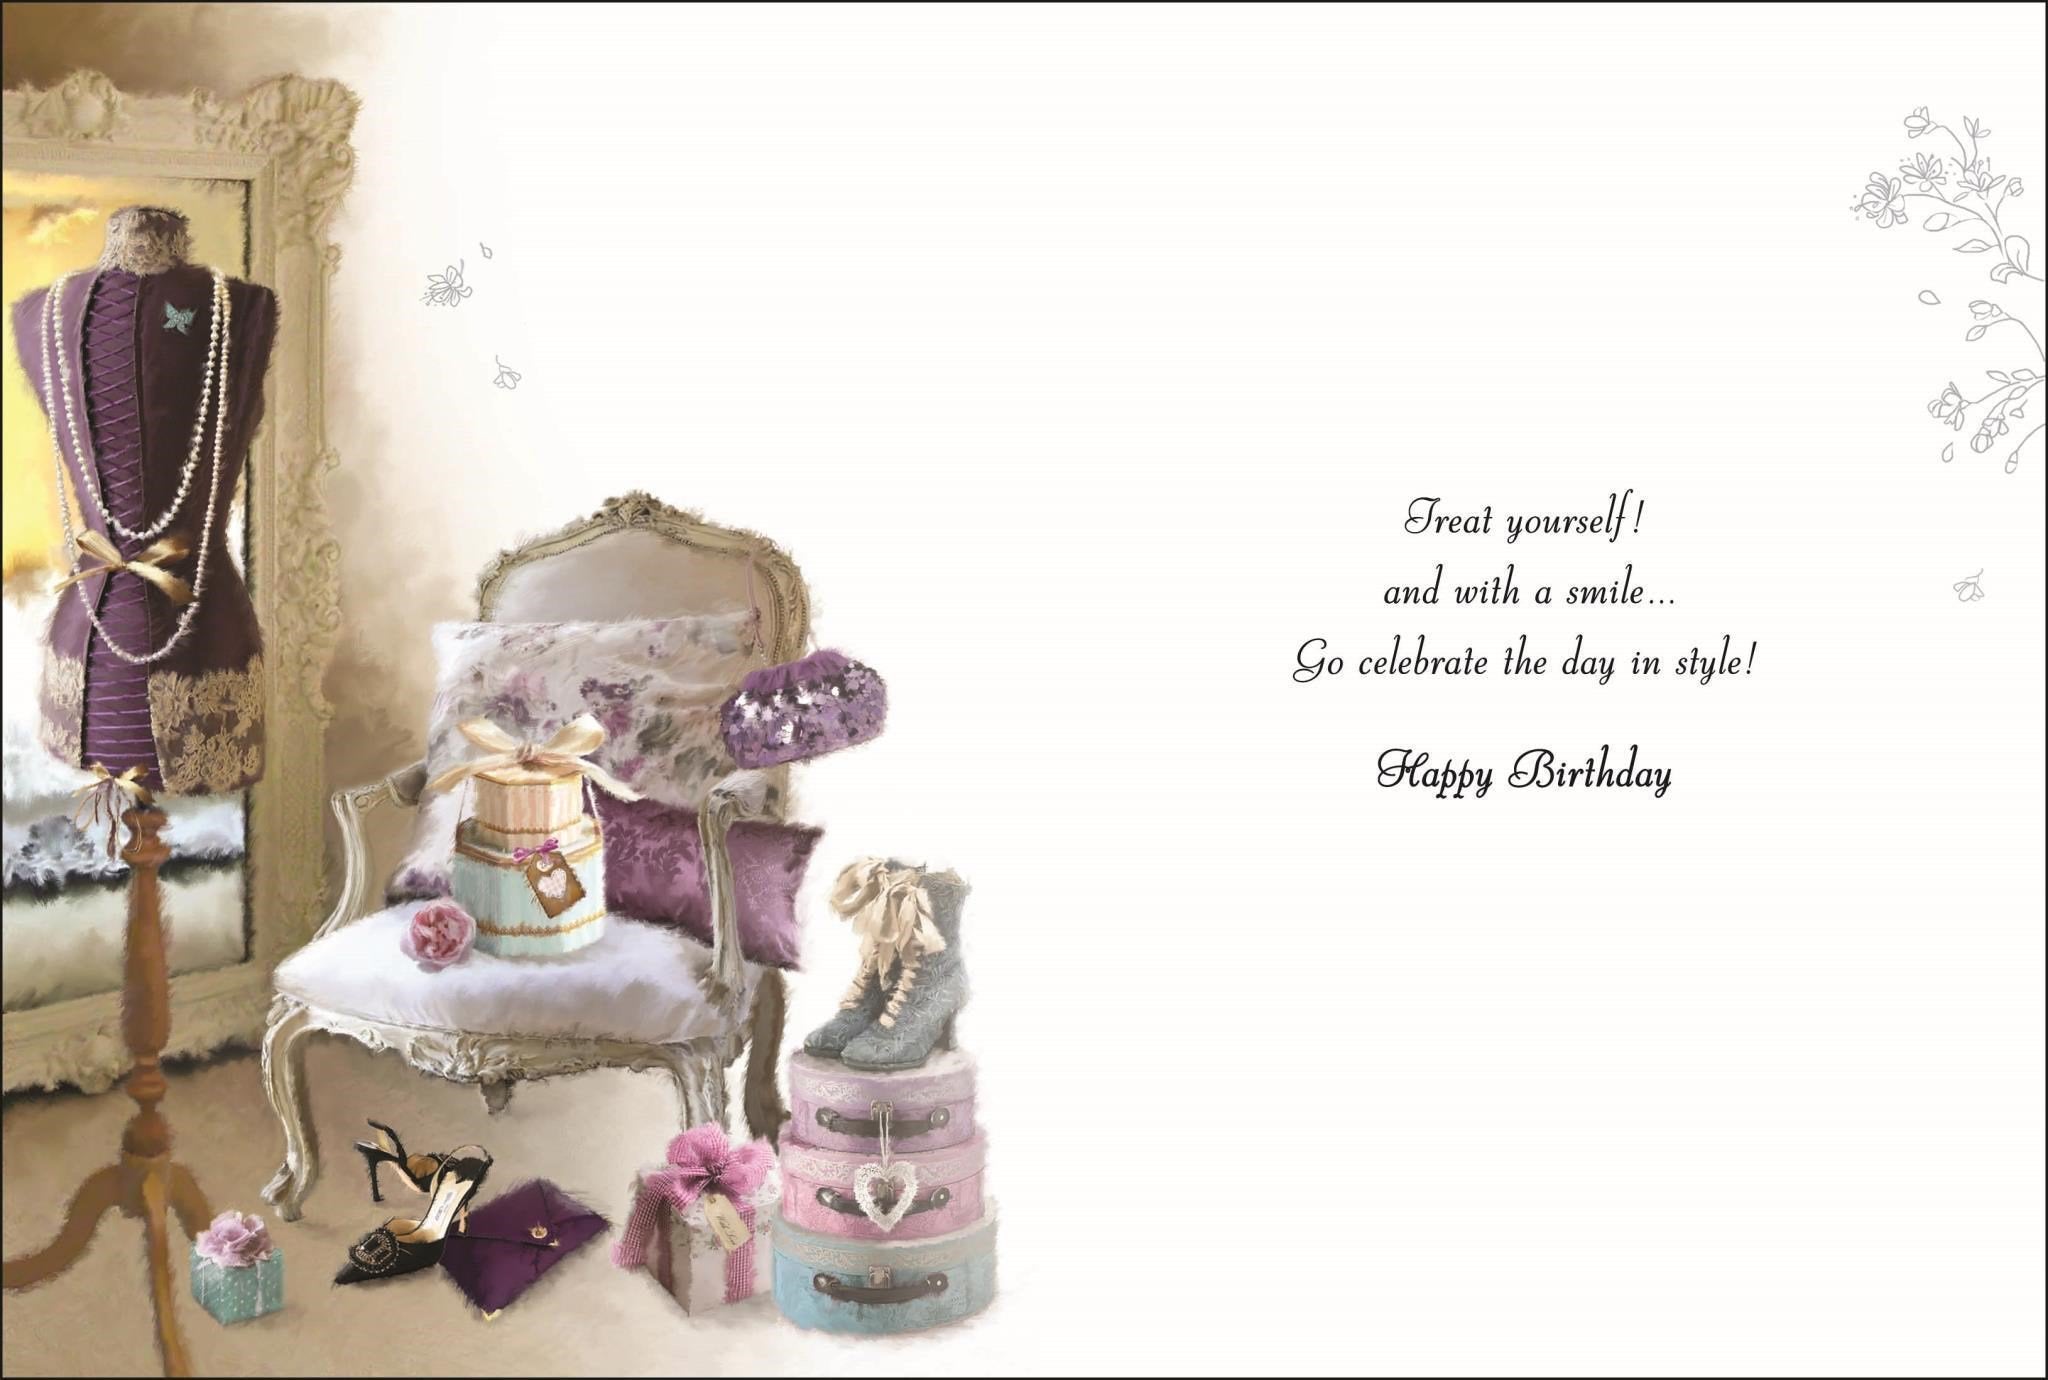 Inside of Open Birthday Mannequin Greetings Card